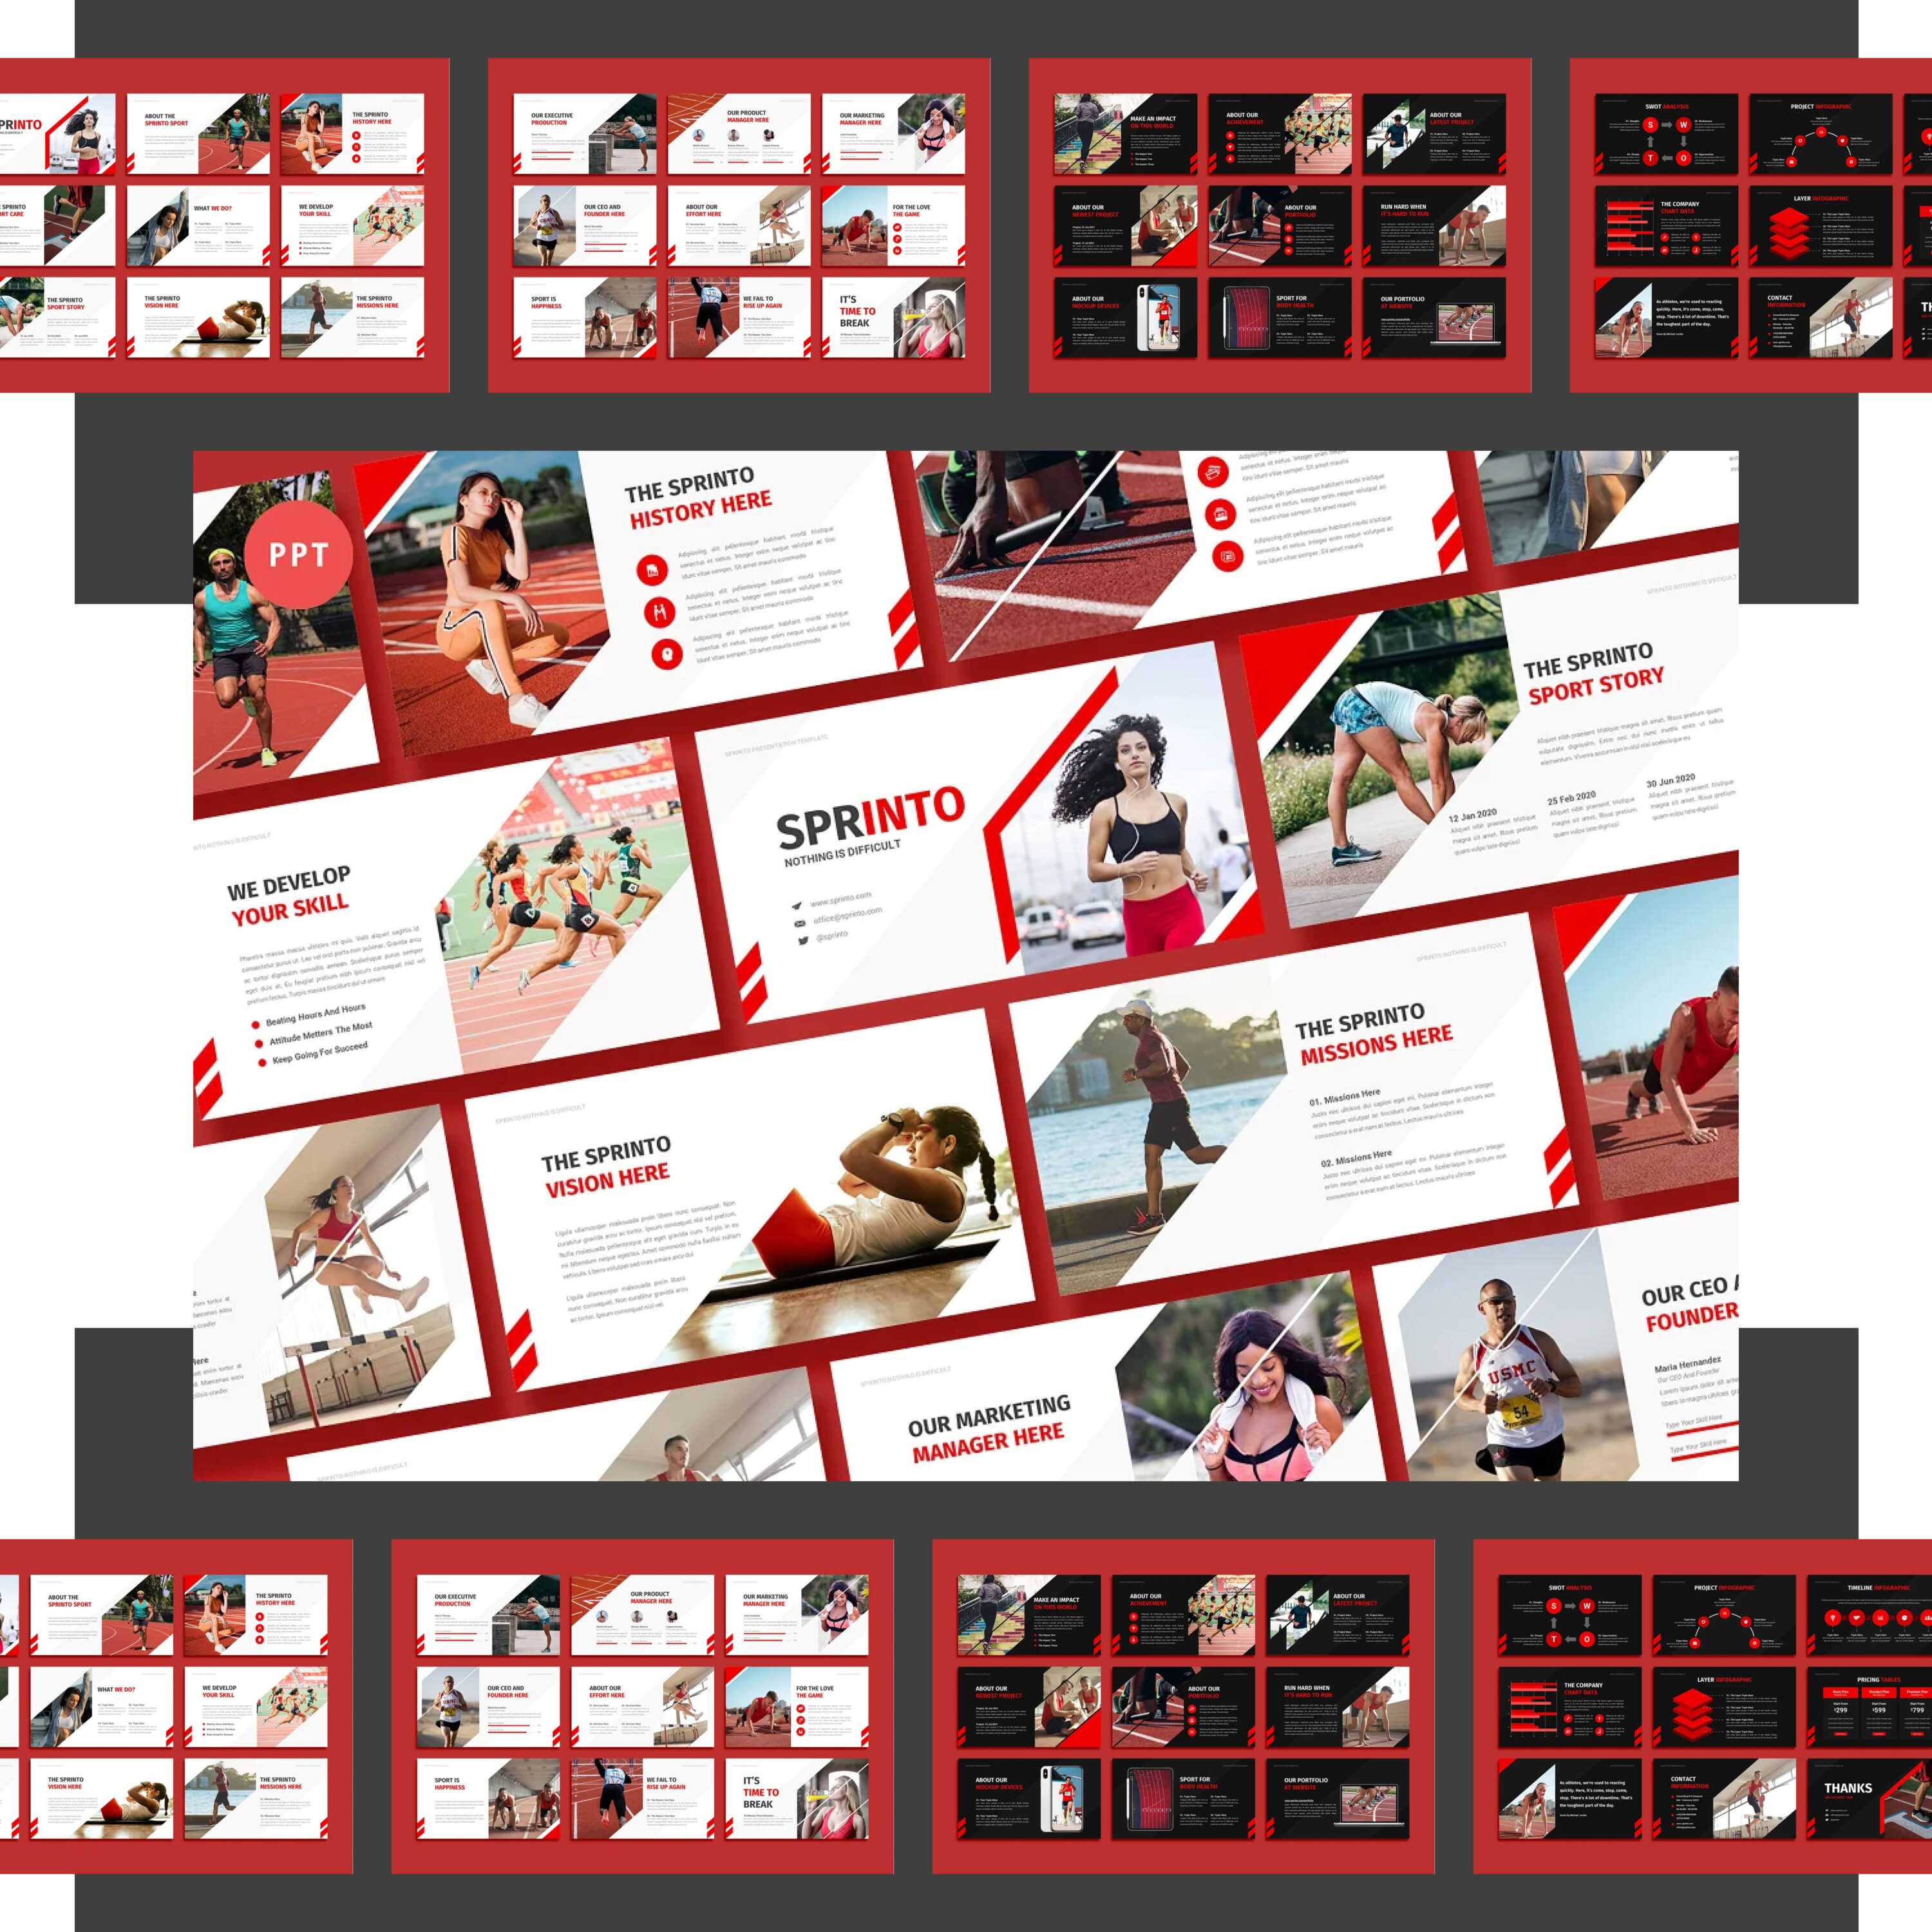 Sprinto - Sport Powerpoint Templates cover.